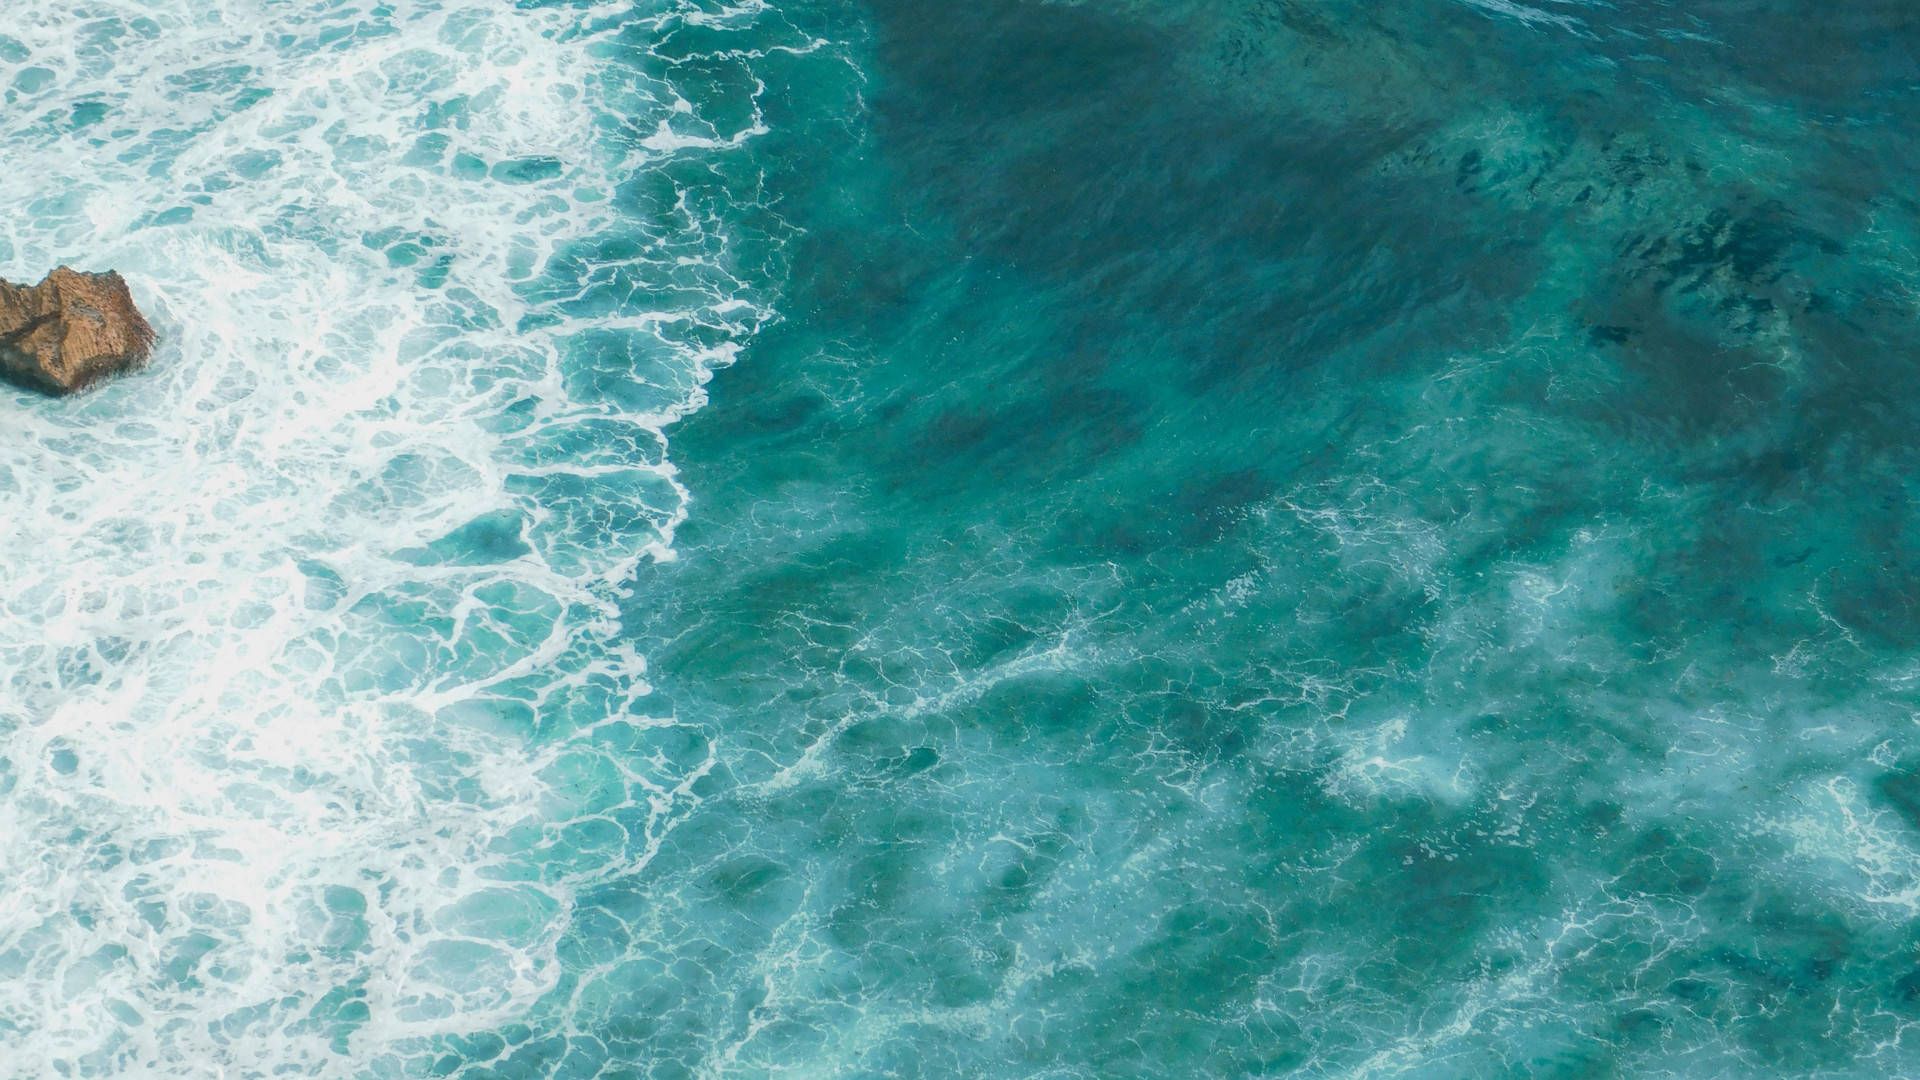 Aerial view of the ocean - Turquoise